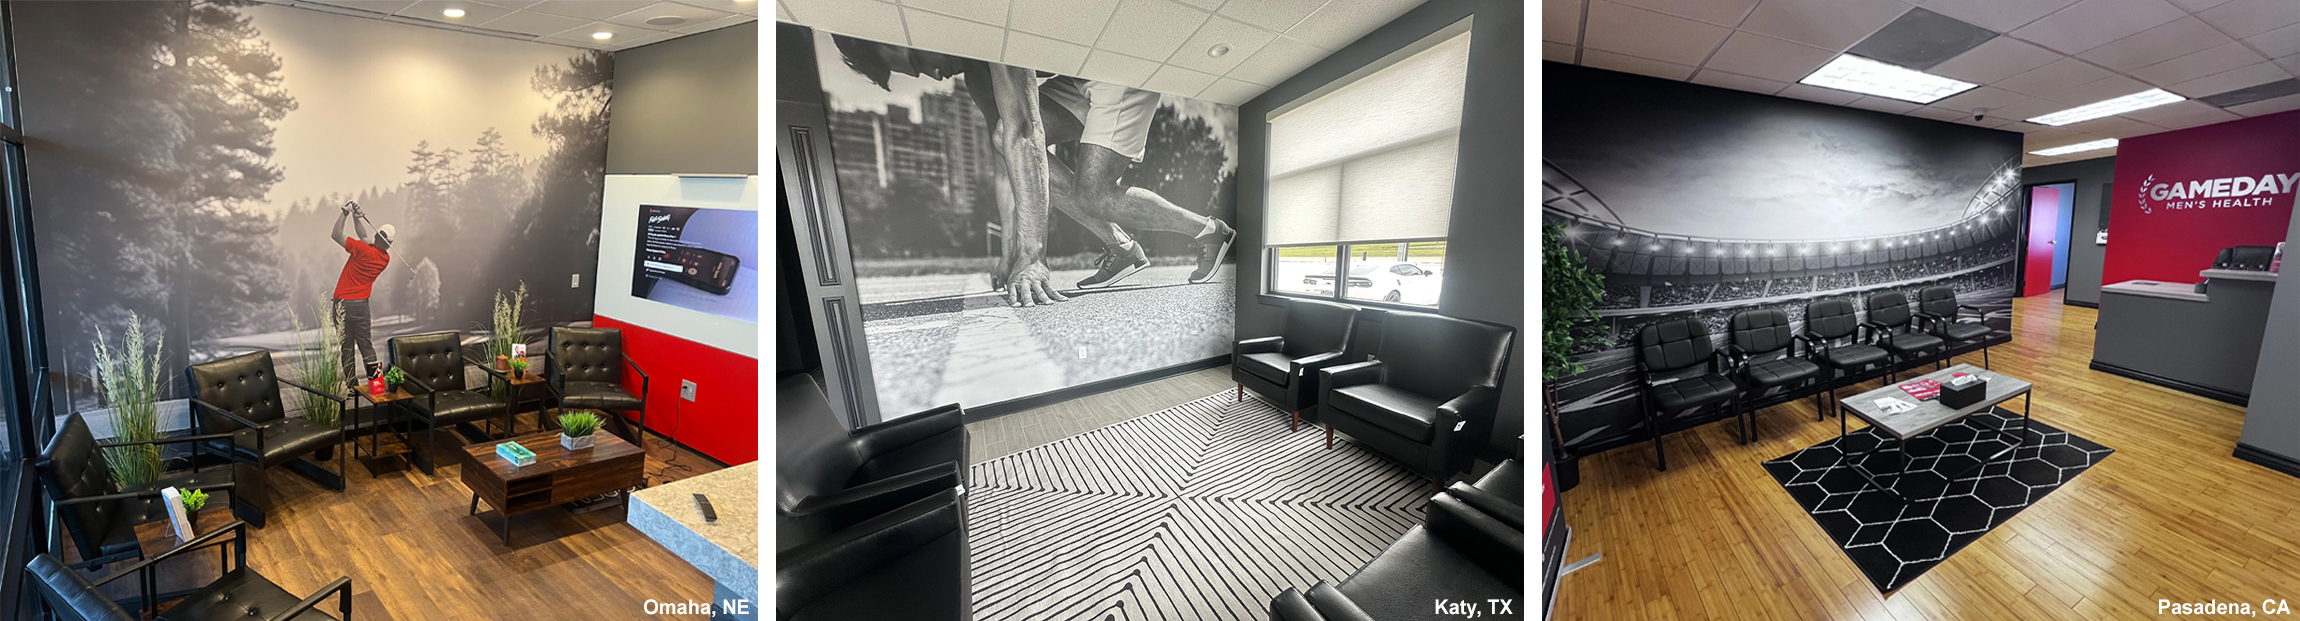 Examples of wall murals installed in Gameday Mens Health locations